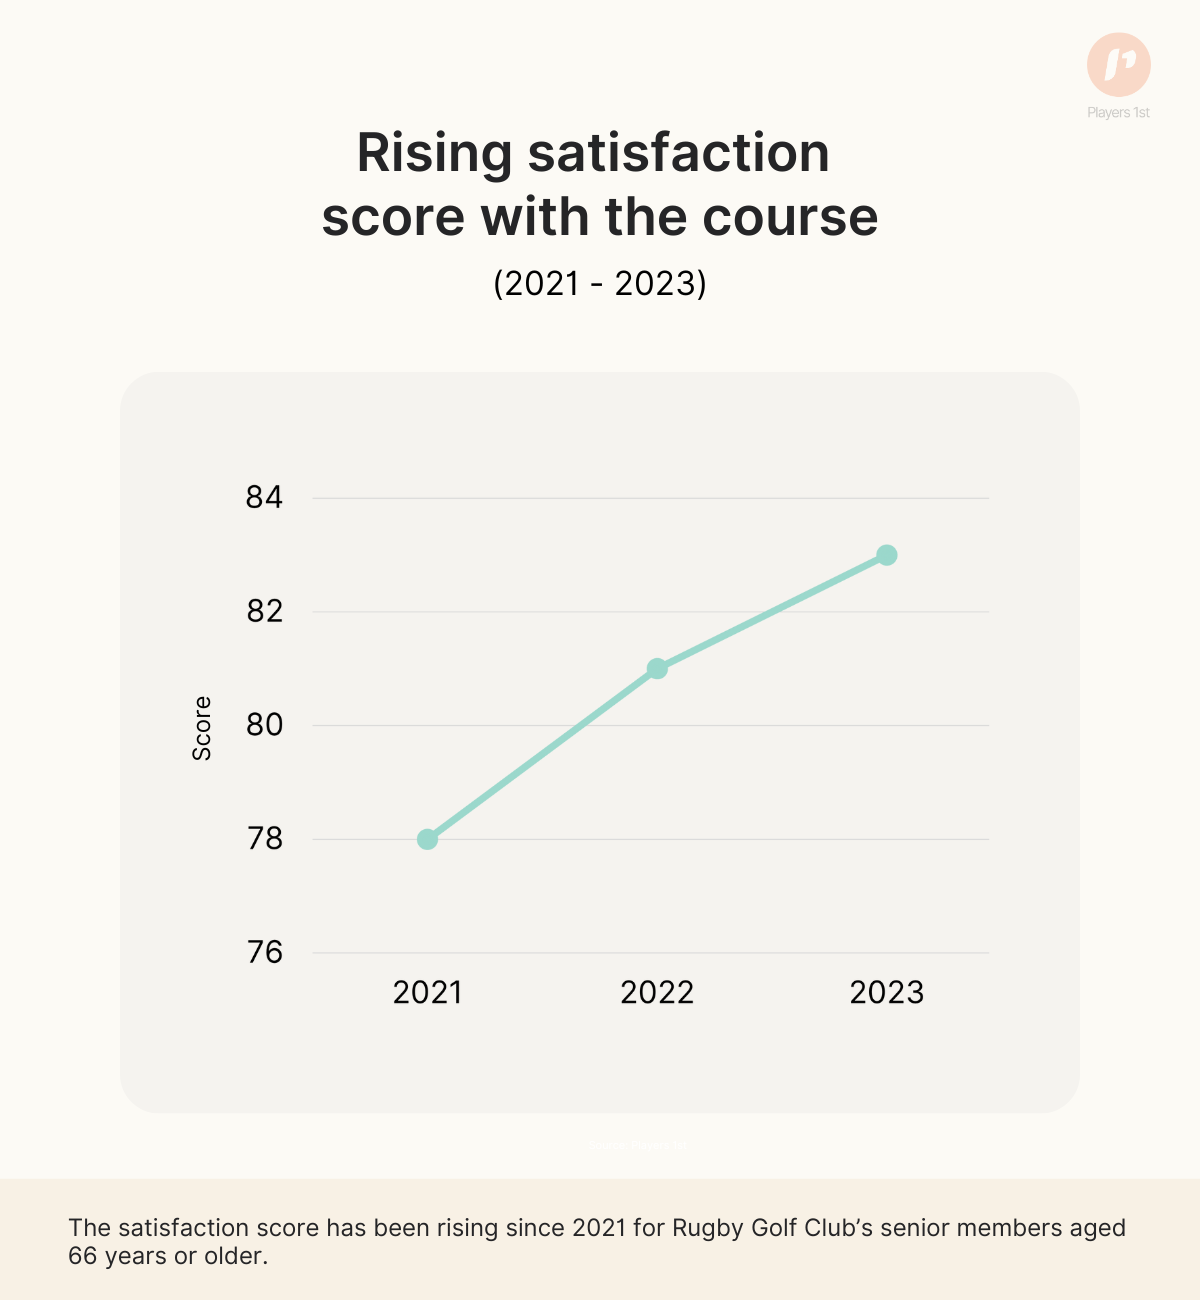 Figure 1: The development of the satisfaction score for the course at Rugby Golf Club's senior members aged 66 and older from 2021-2023. Source: Players 1st